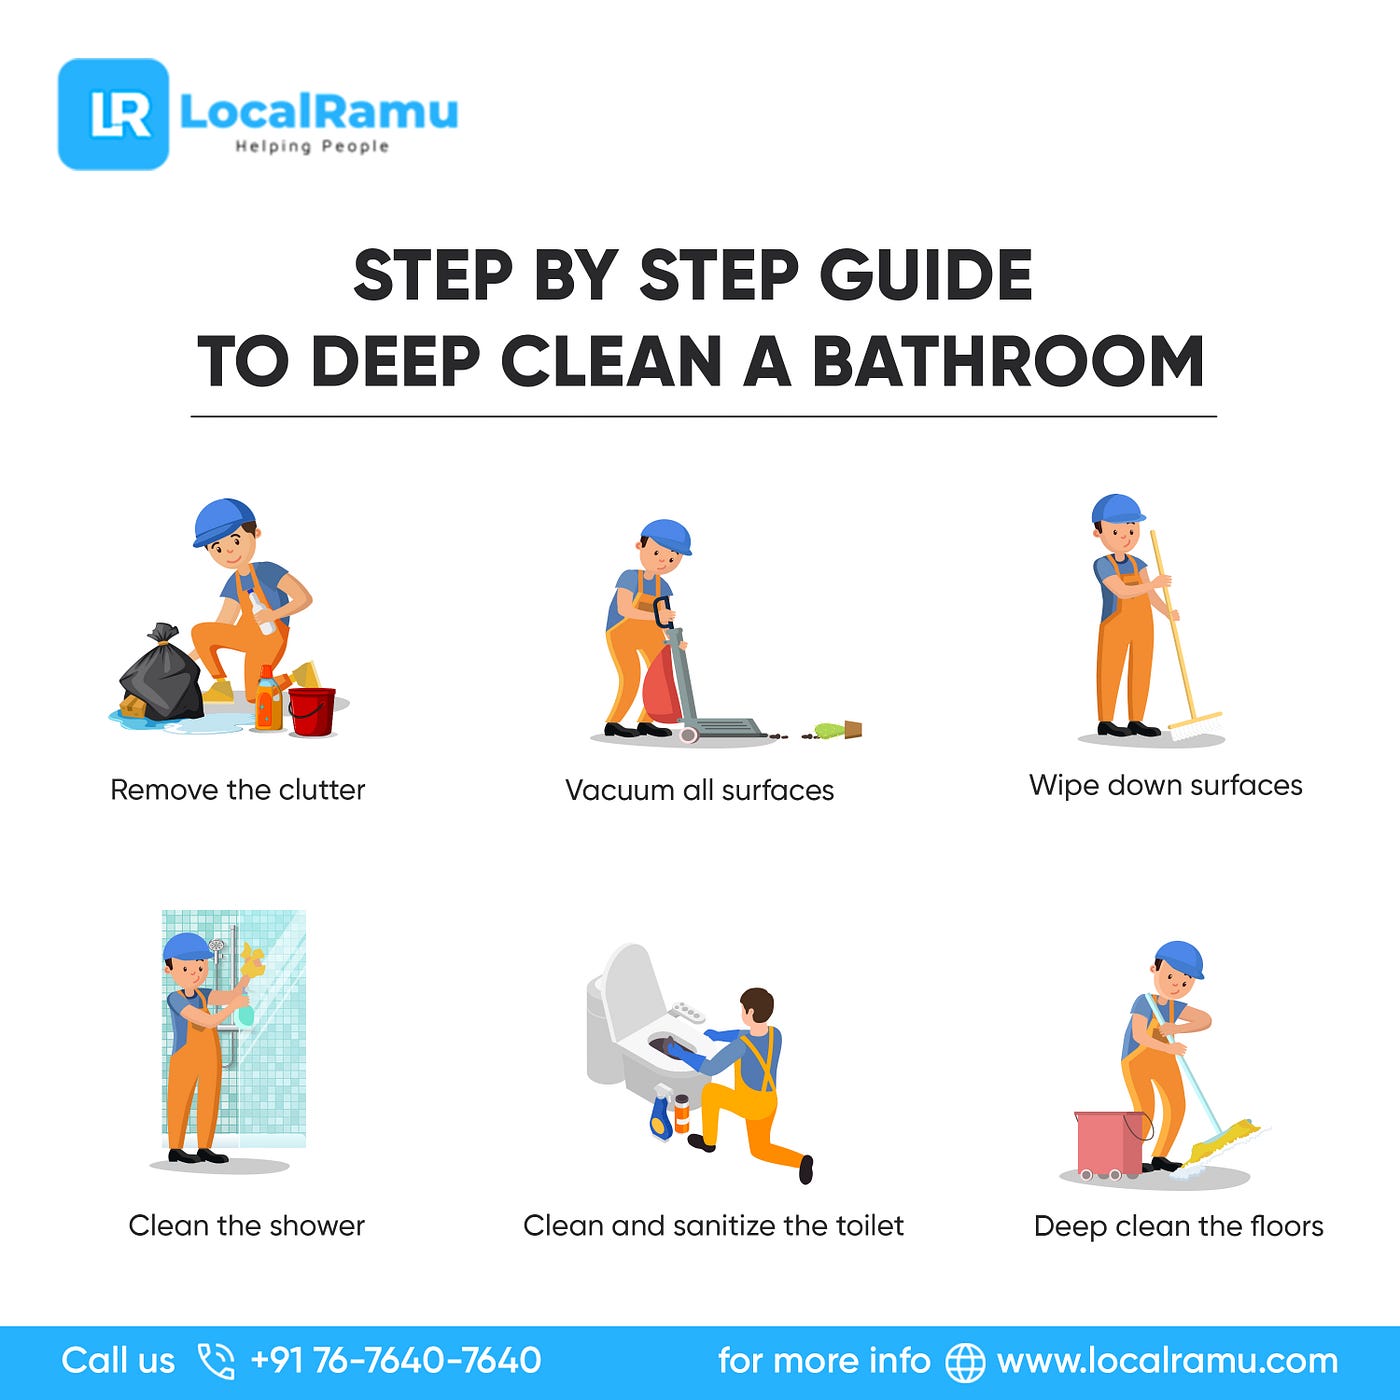 How to Clean a Bathroom: A Step-by-Step Guide